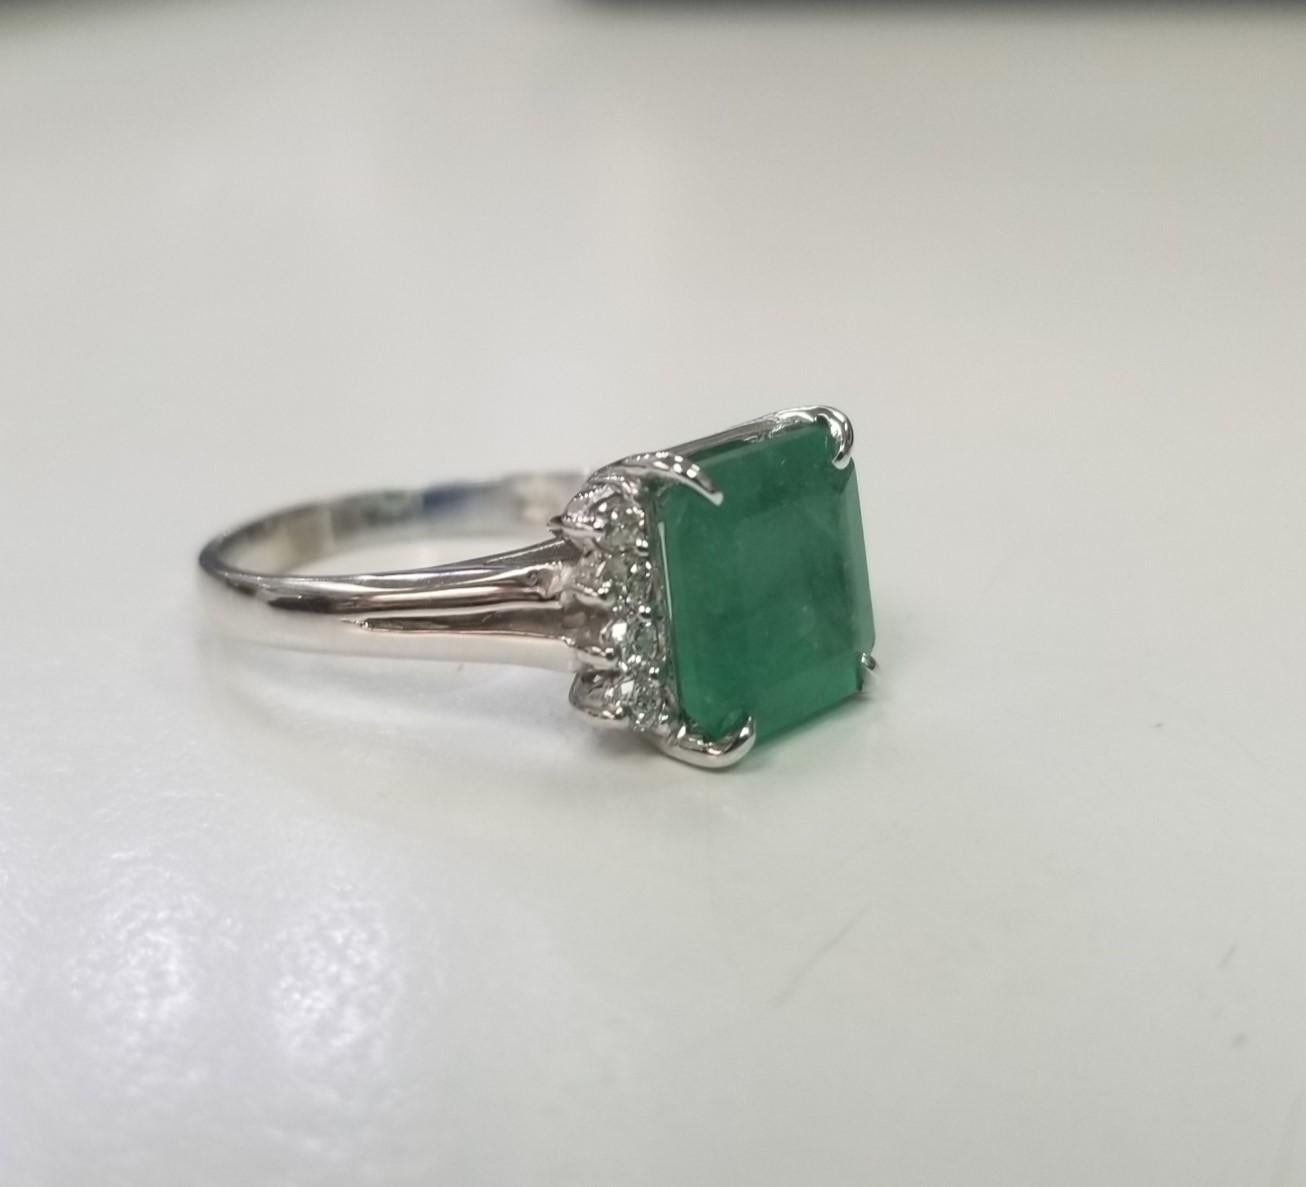 *Motivated to Sell – Please make a Fair Offer*
Specifications: 
    Metal: 14k white gold
    Weight: 4.3 Gr
    Main Stone: Emerald Cut Emerald 3.01cts.
    Side Stones: 8 Diamonds    
    Weight: .21cts.
    Color: G
    Clarity: VS2
    Size: 6.5